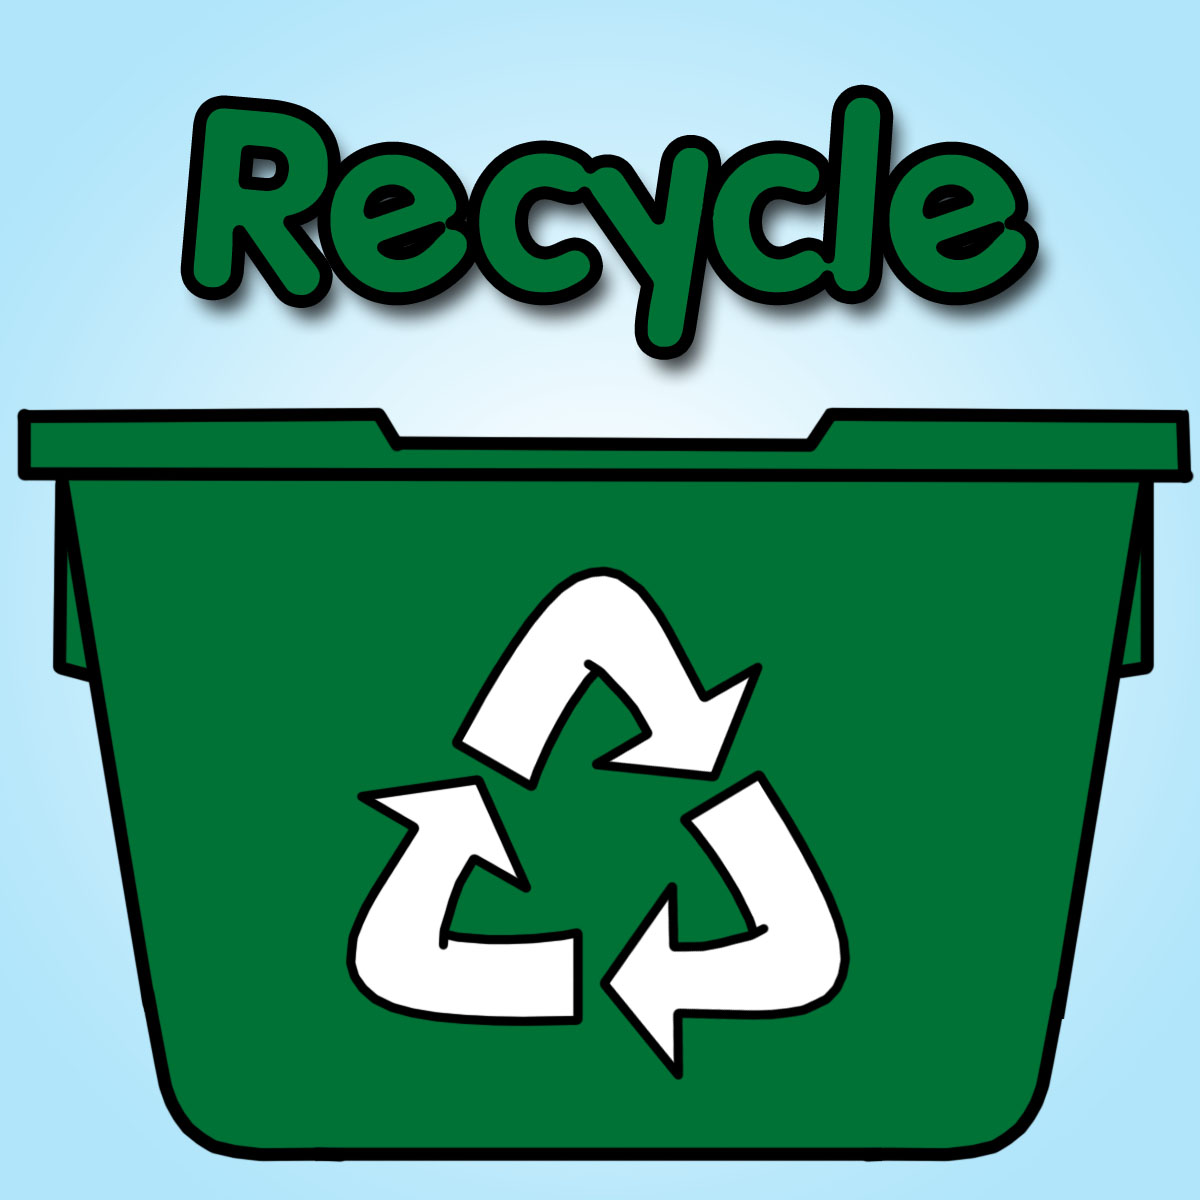 Recycle recycling clipart